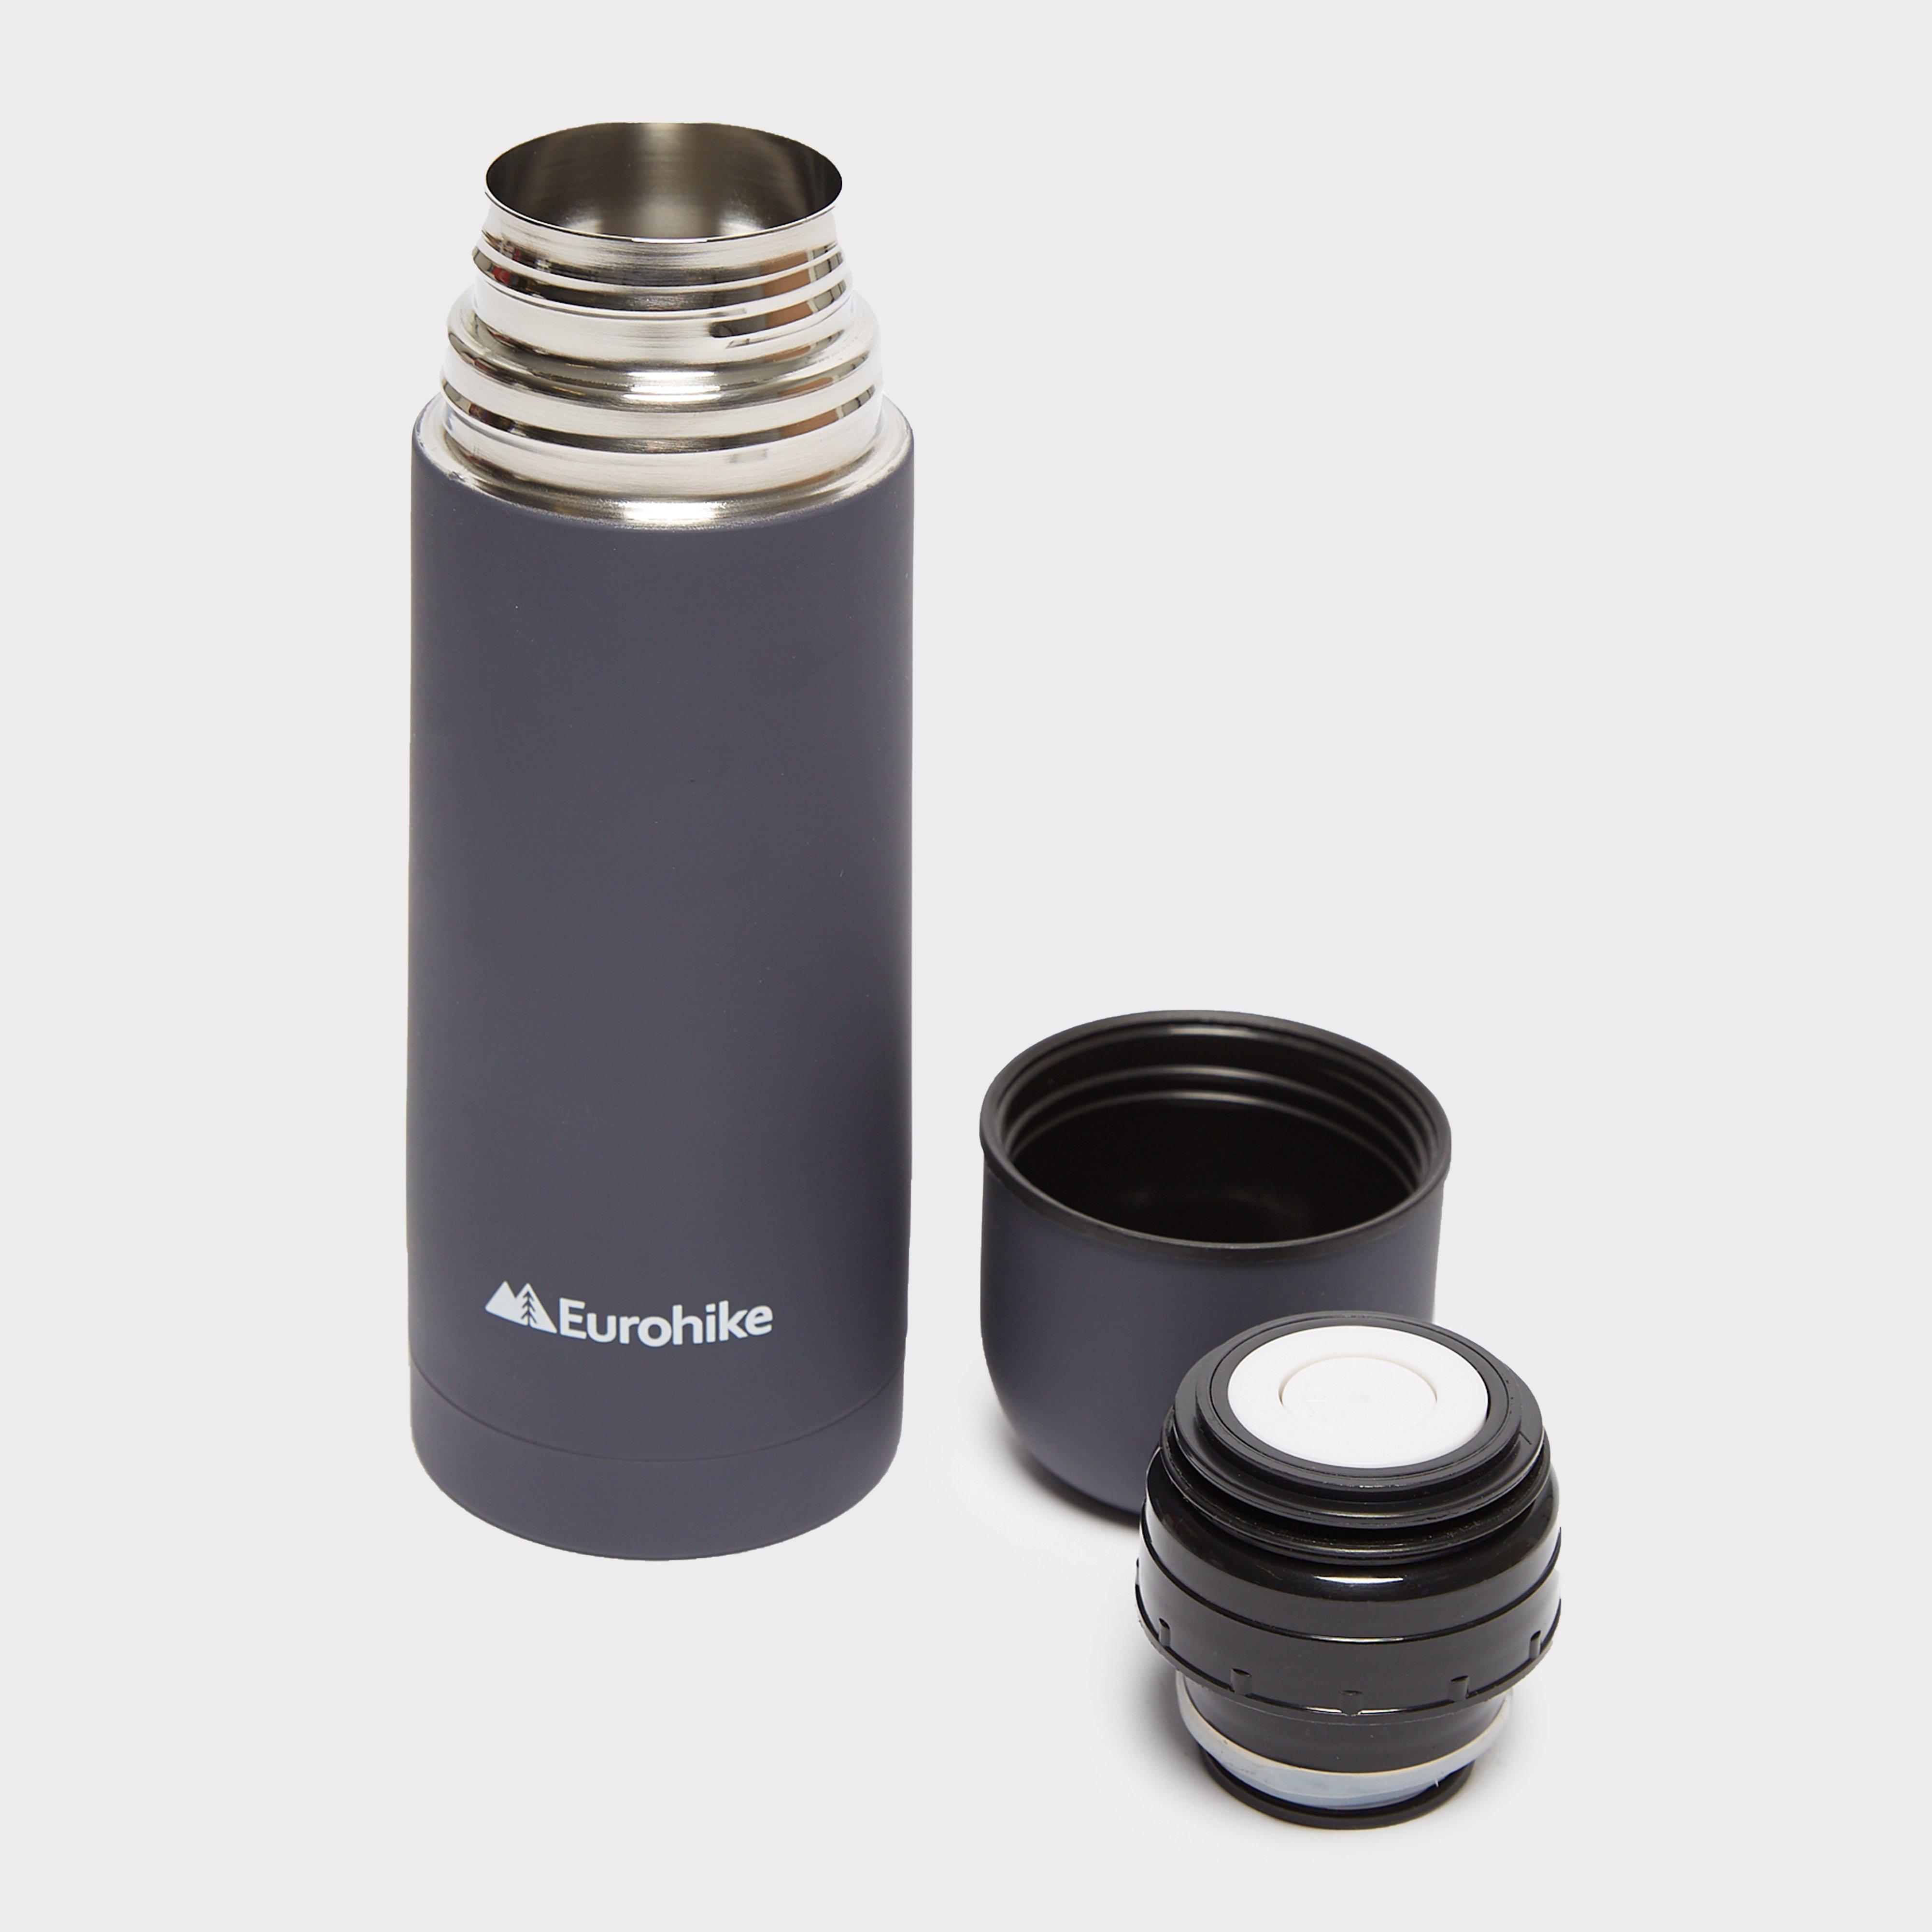 Eurohike Rubberised Flask 300ml Review